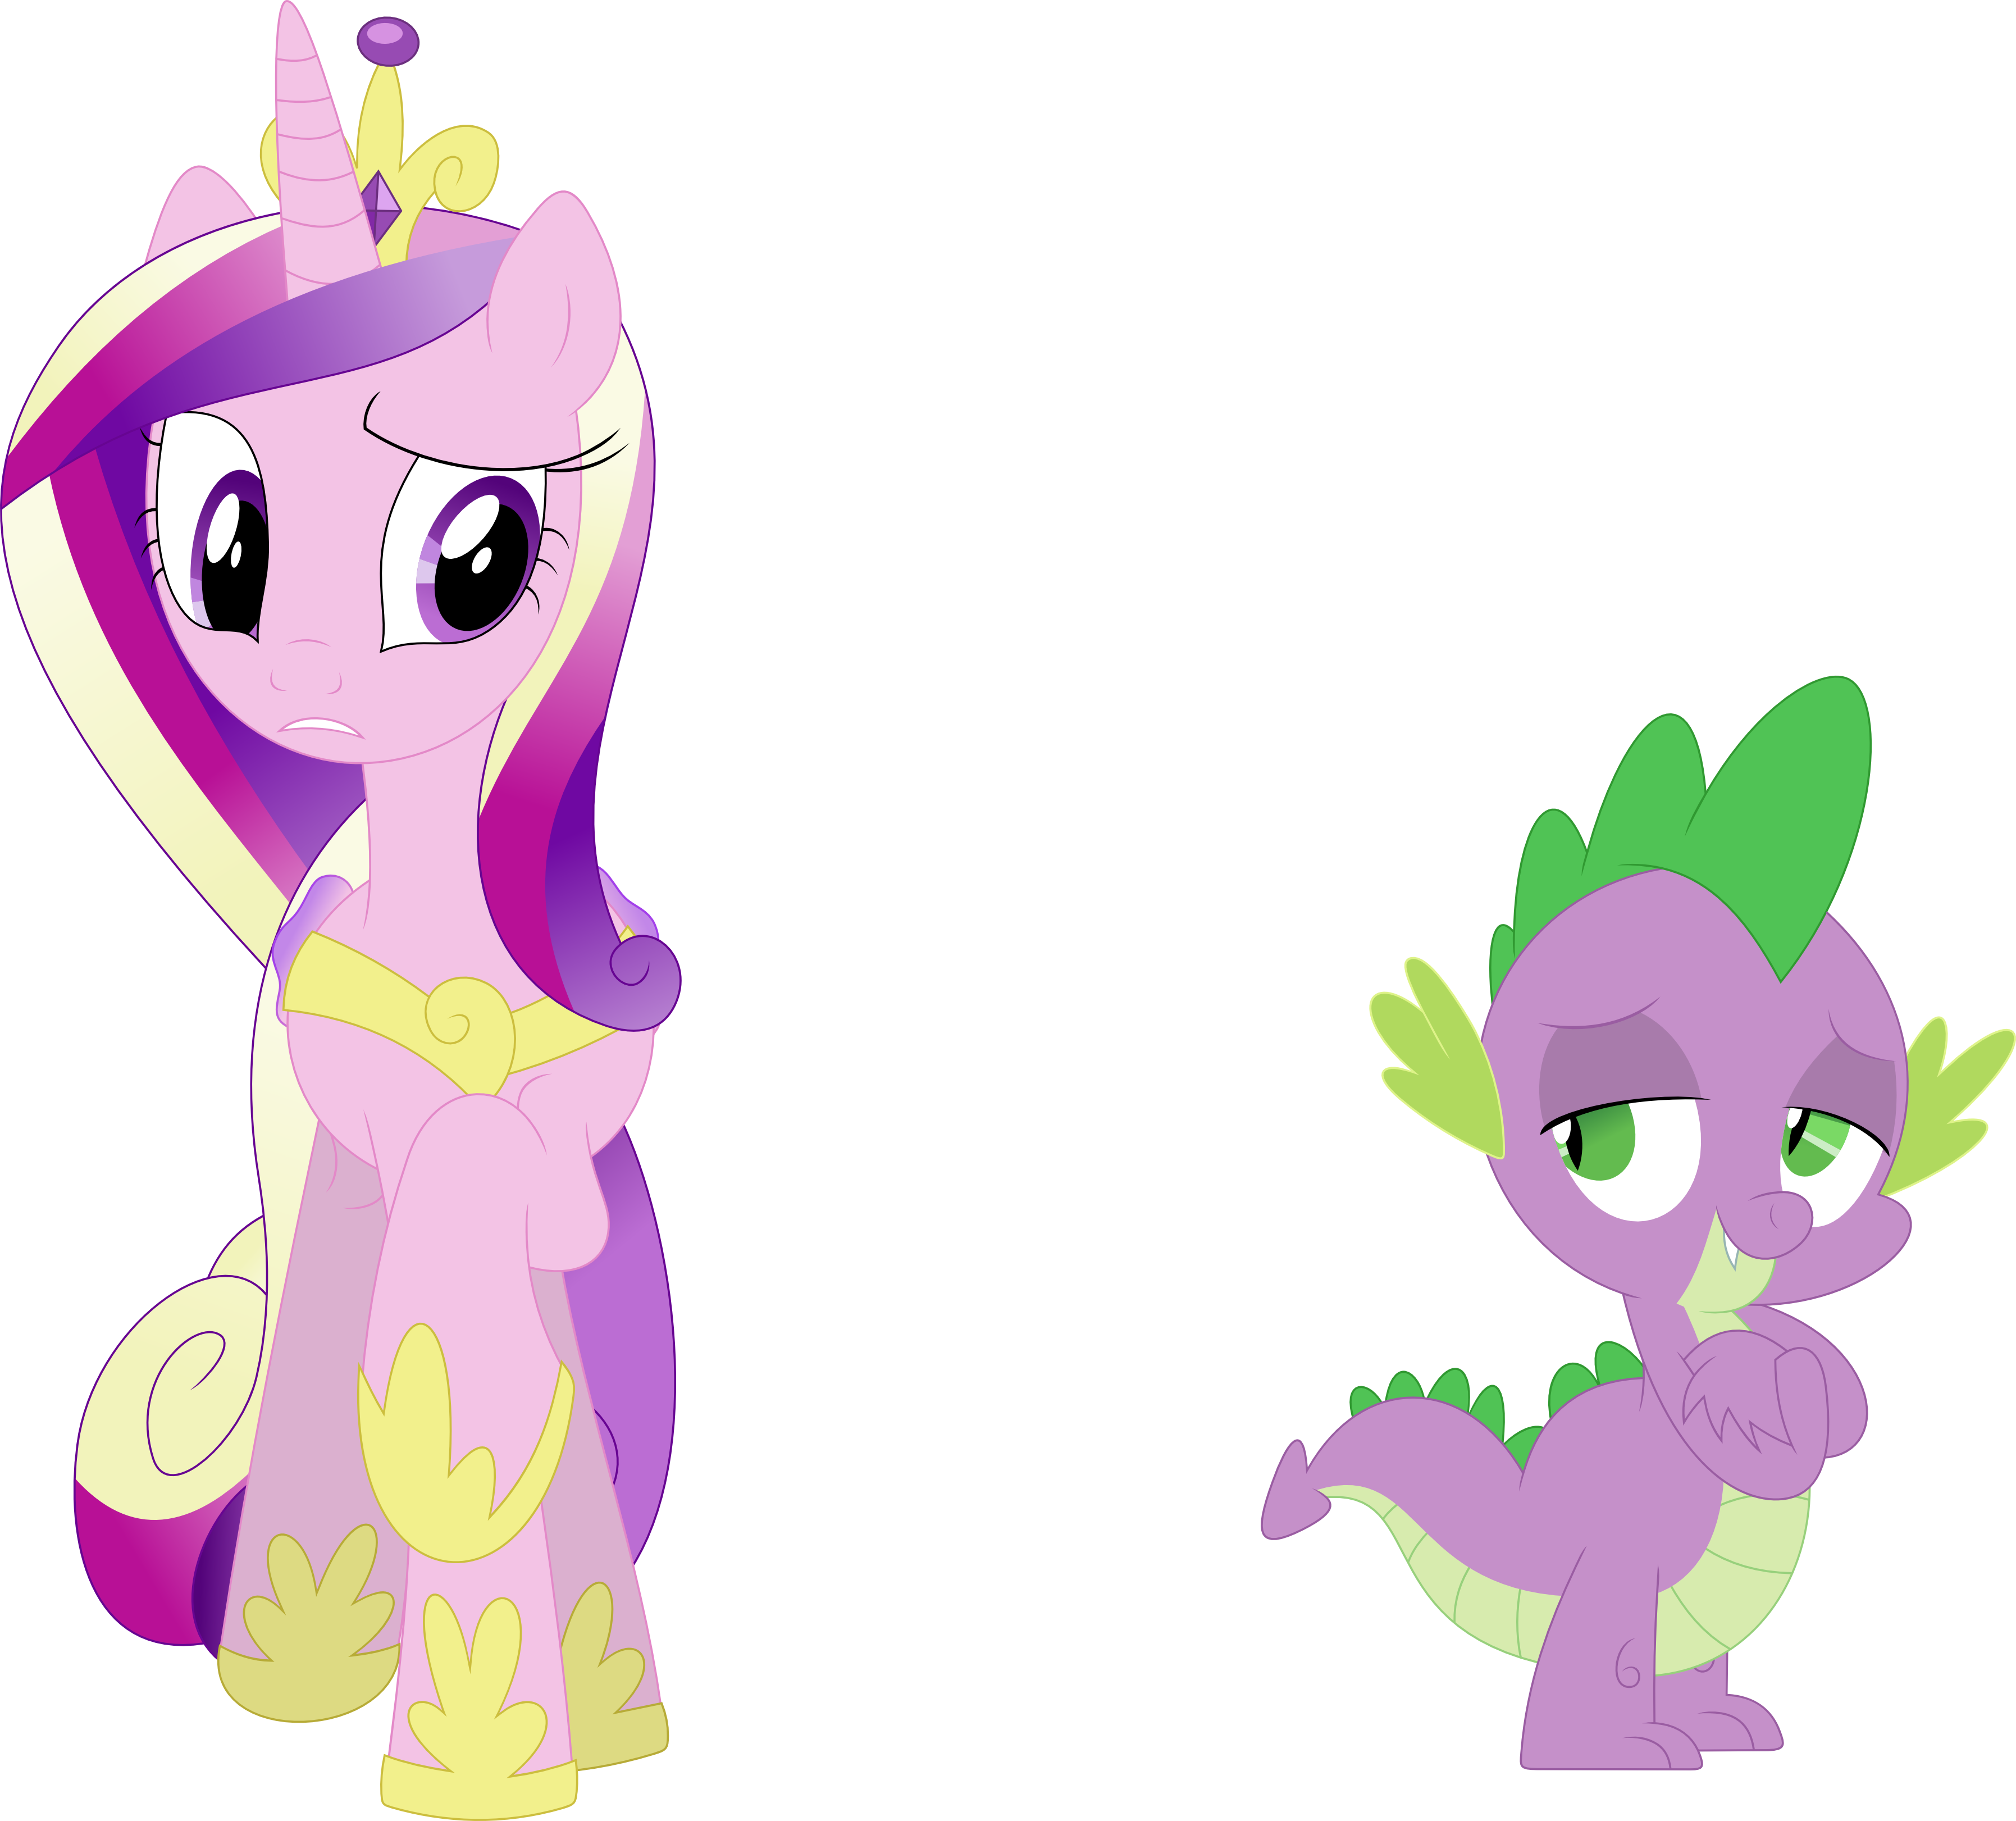 Please don't look at me like that, Spike by Porygon2z on DeviantArt